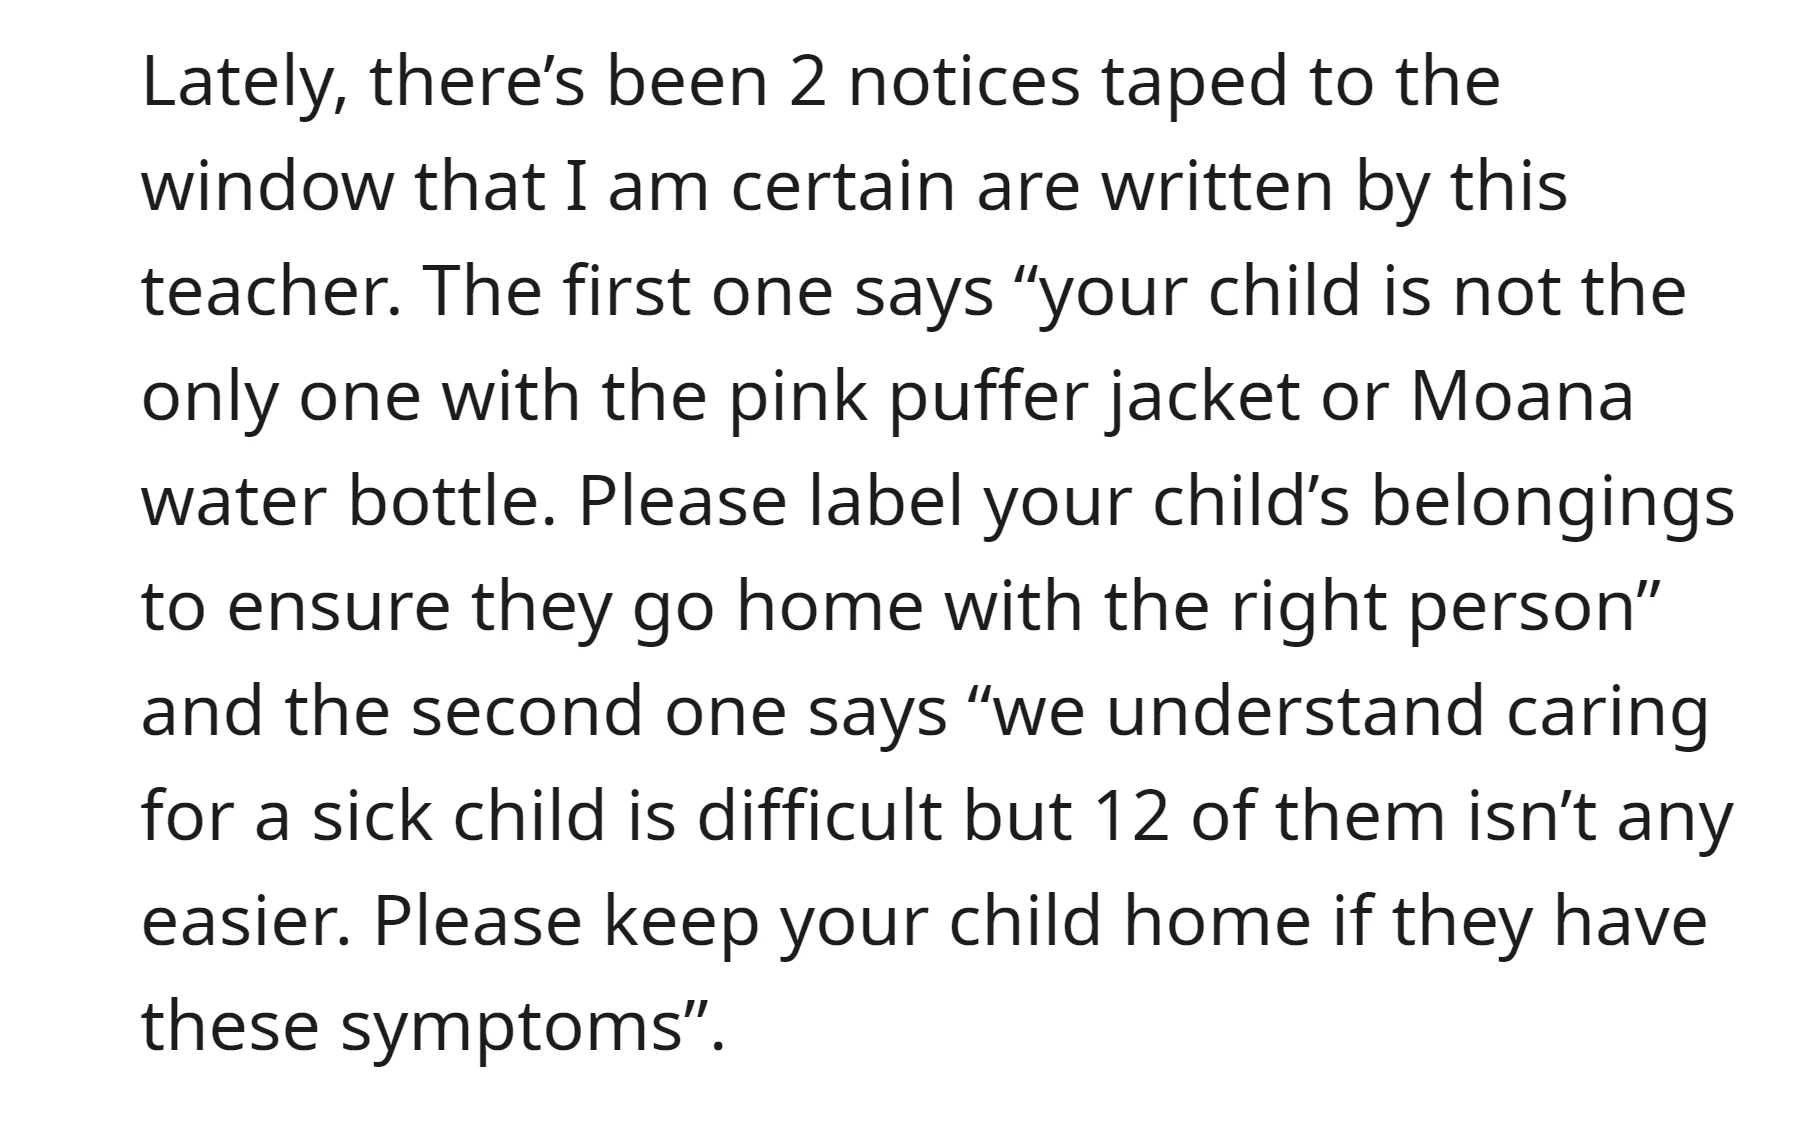 The teacher posted notices urging parents to label their children's belongings to avoid mix-ups